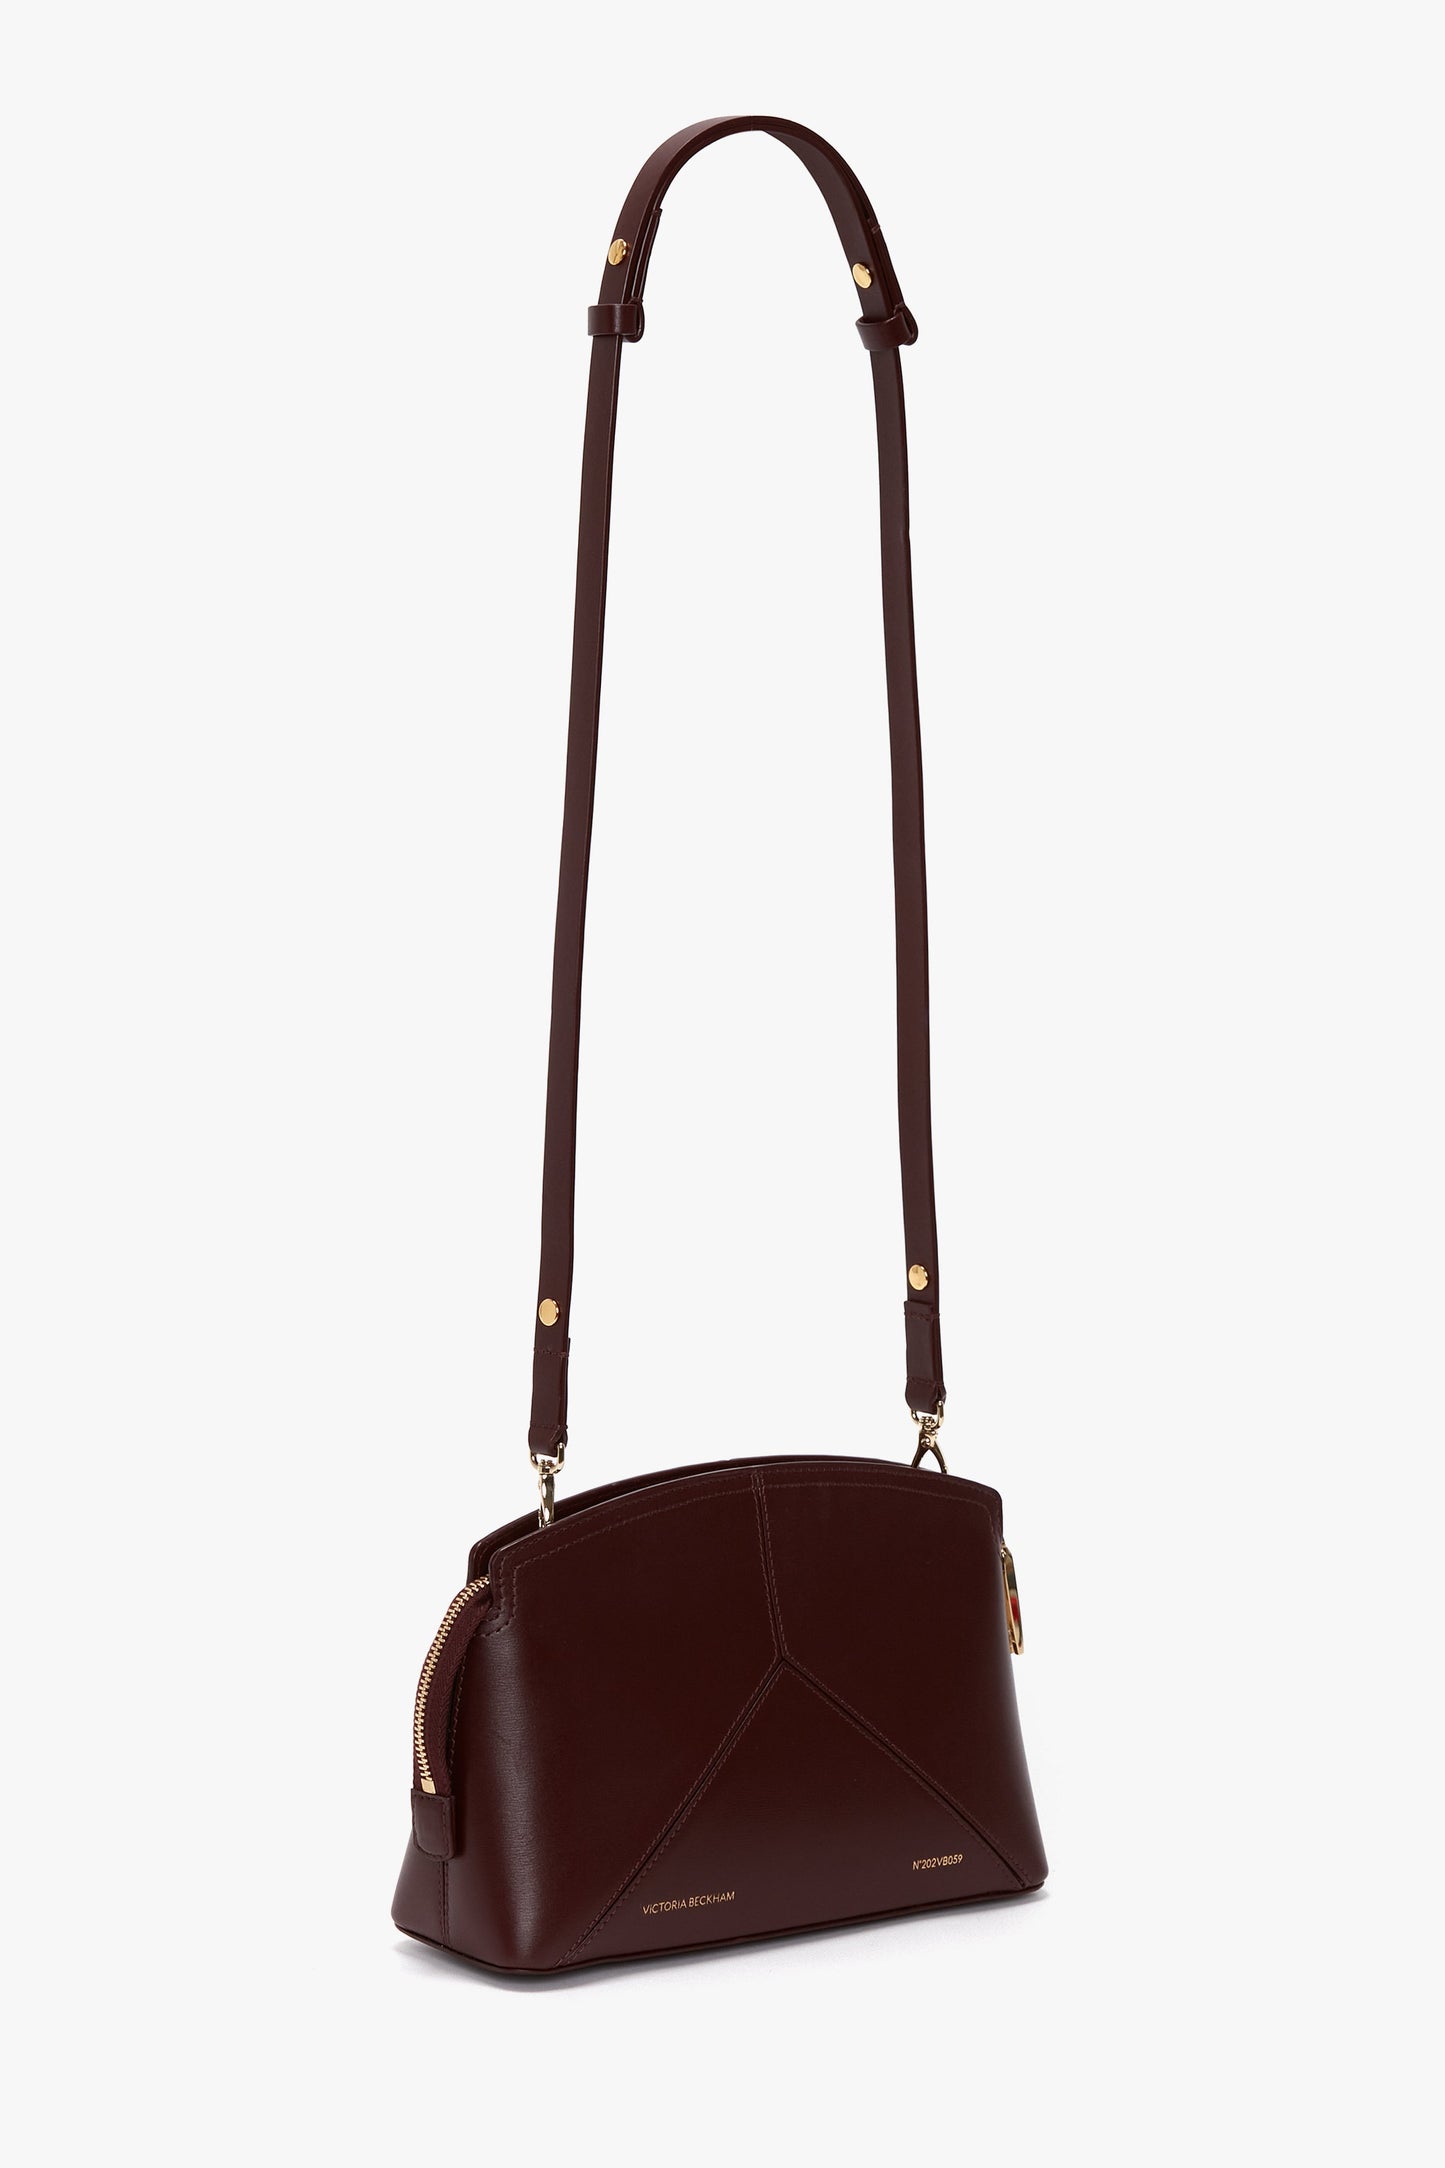 The Victoria Beckham Victoria Crossbody Bag In Burgundy Leather is a sophisticated bag crafted from rich burgundy leather, featuring an adjustable strap, gold-tone hardware, and a secure zippered top.